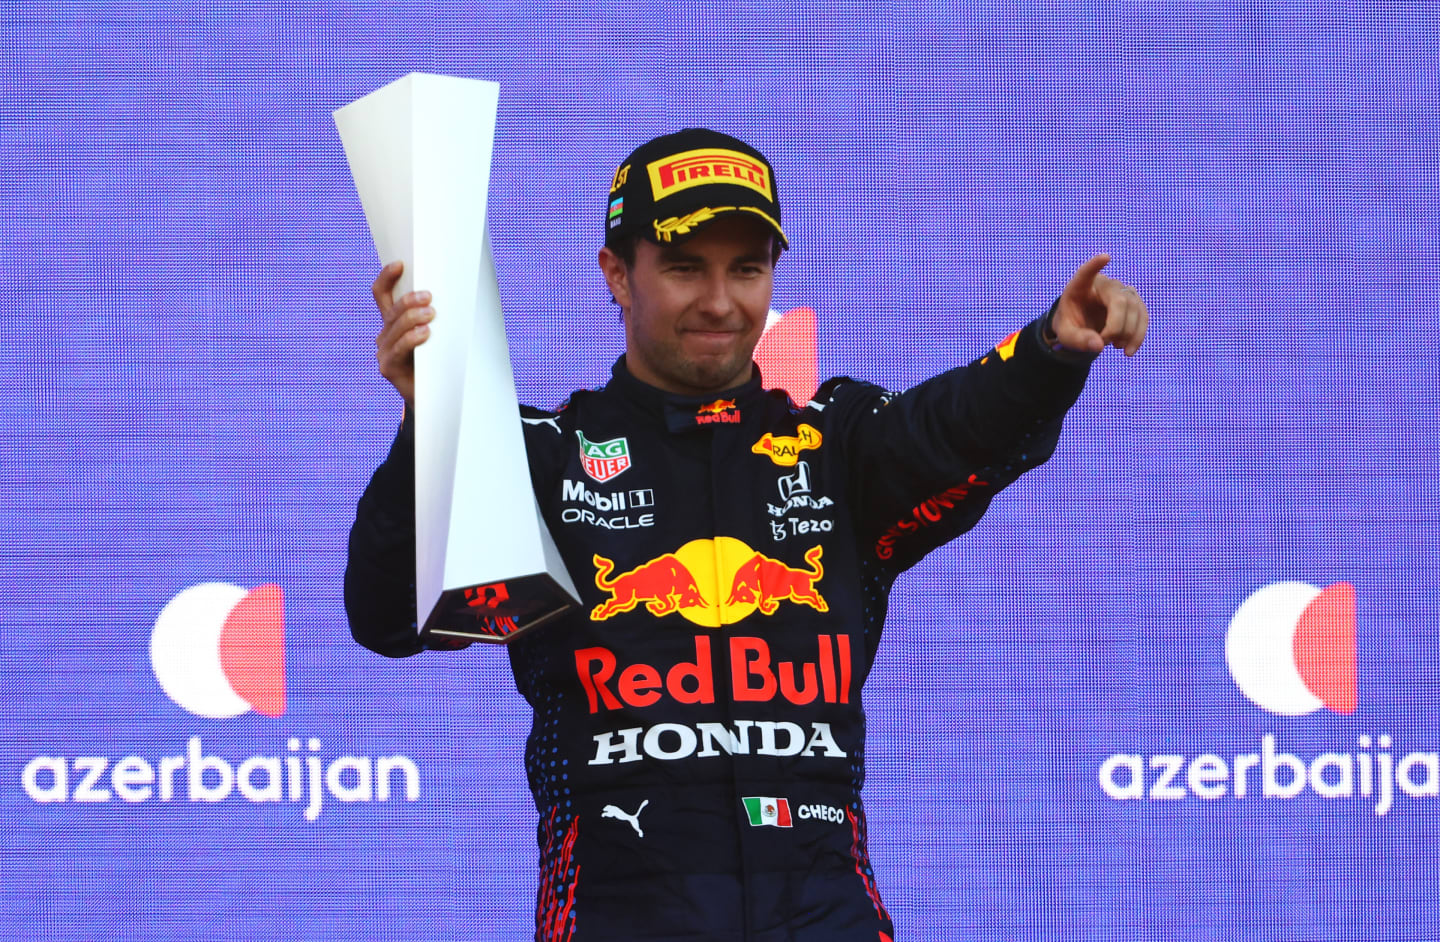 BAKU, AZERBAIJAN - JUNE 06: Race winner Sergio Perez of Mexico and Red Bull Racing celebrates on the podium during the F1 Grand Prix of Azerbaijan at Baku City Circuit on June 06, 2021 in Baku, Azerbaijan. (Photo by Francois Nel/Getty Images)